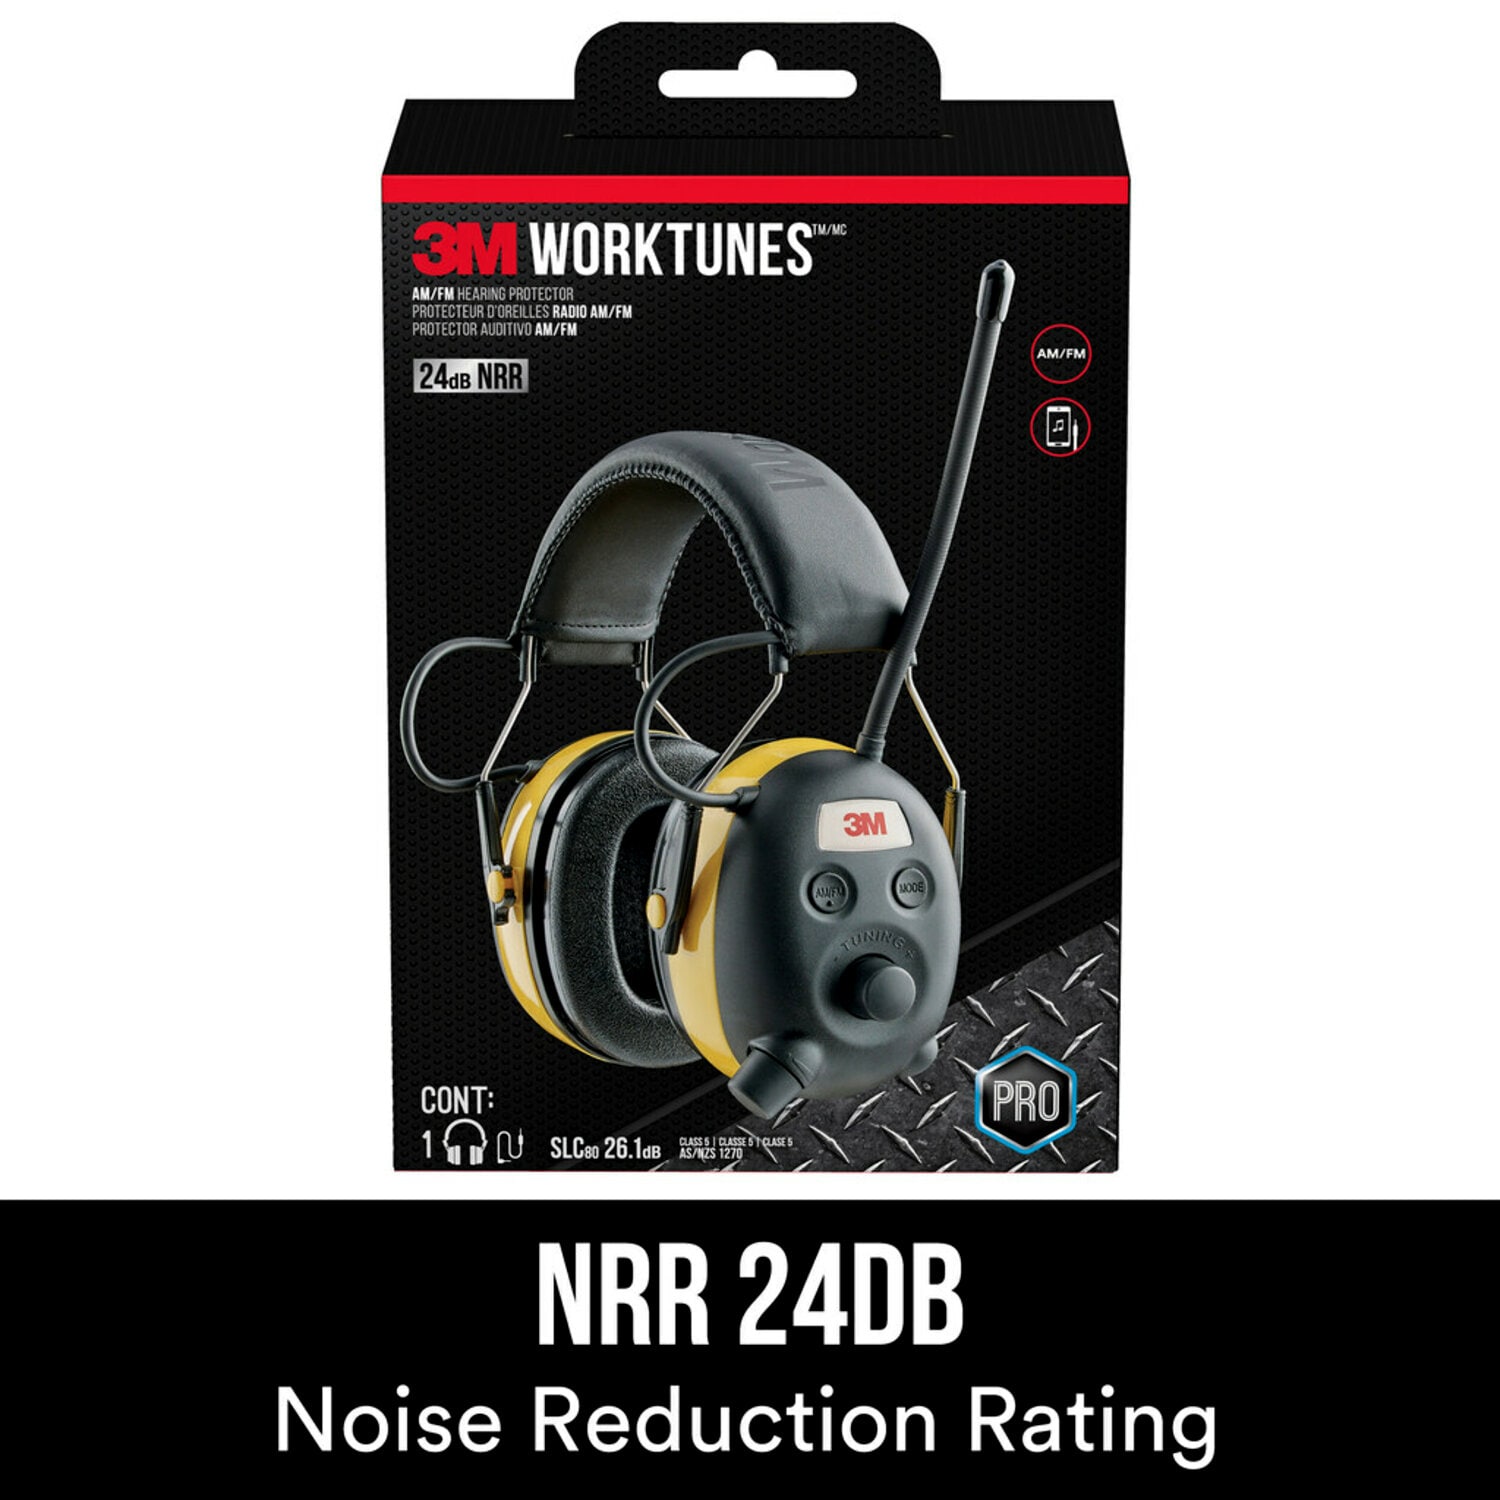 7100156587 - 3M Worktunes AM/FM Hearing Protector, 90541H1-DC-PS, 4 eaches/case